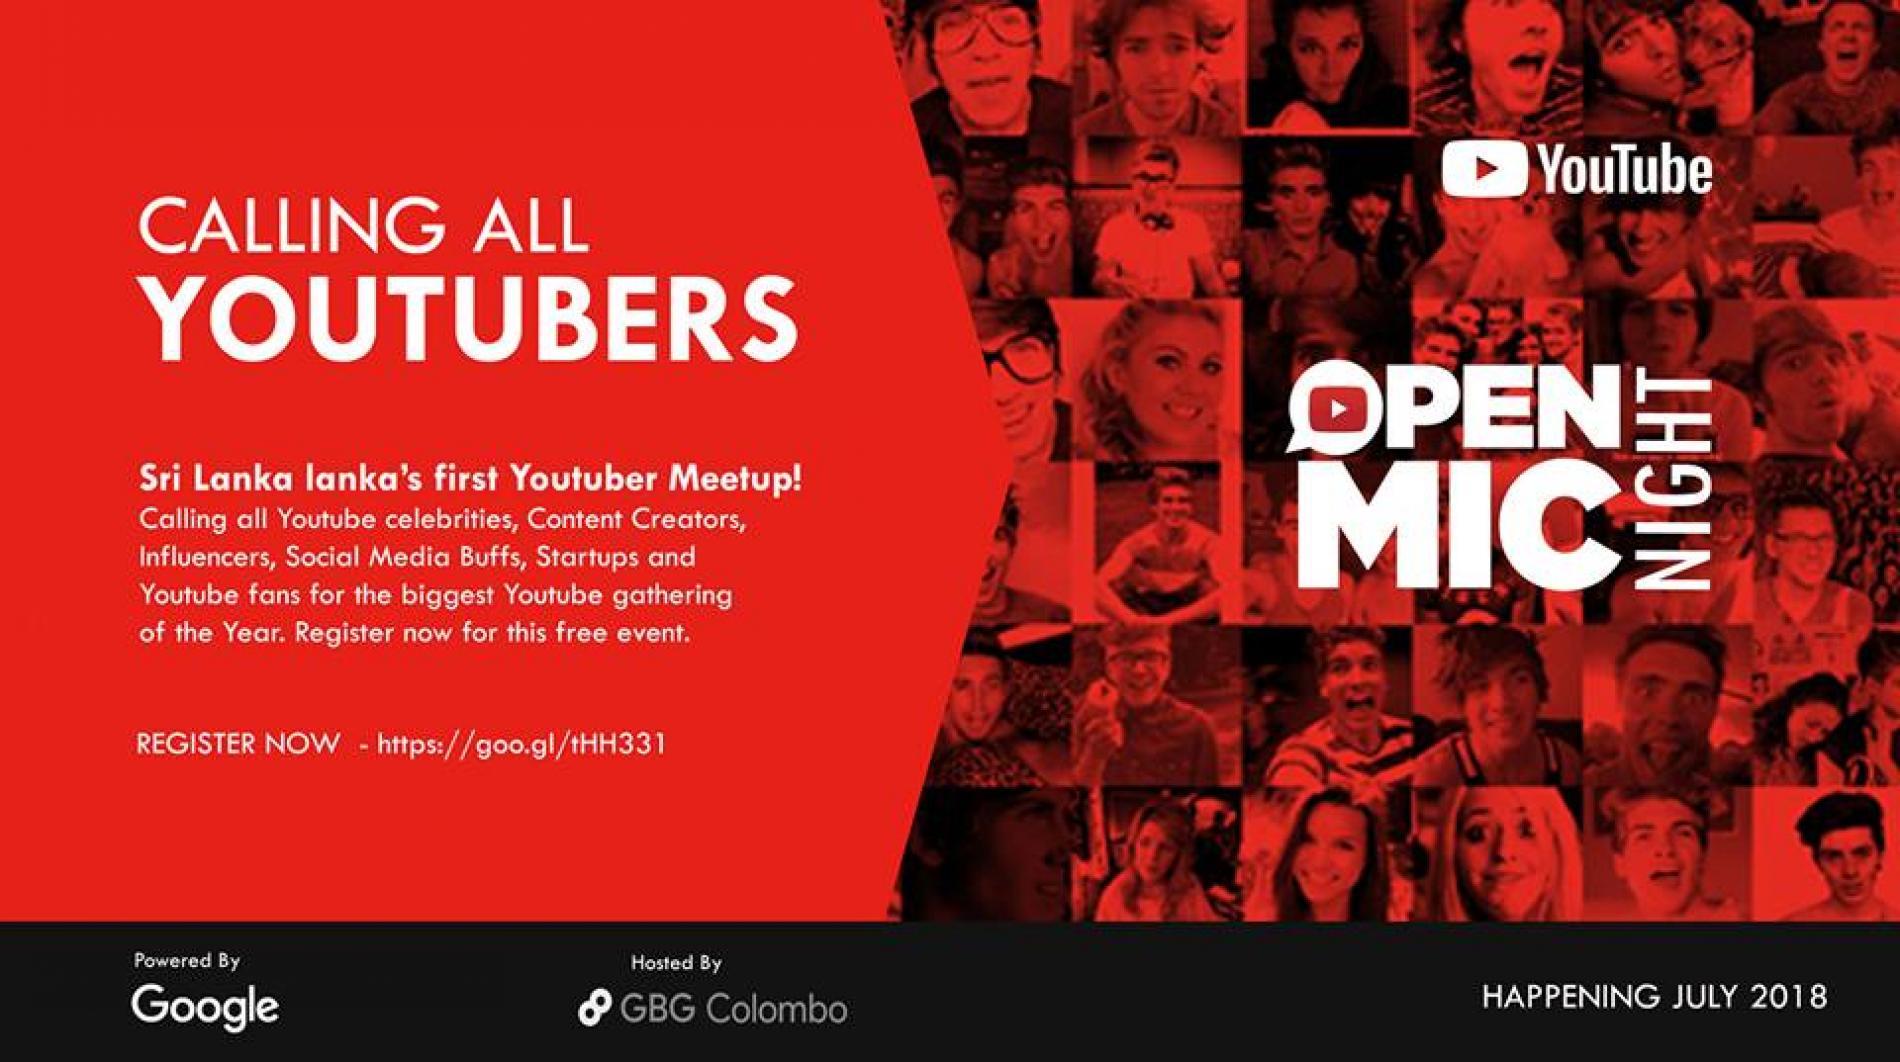 The Biggest Youtube Meet Is This Month!